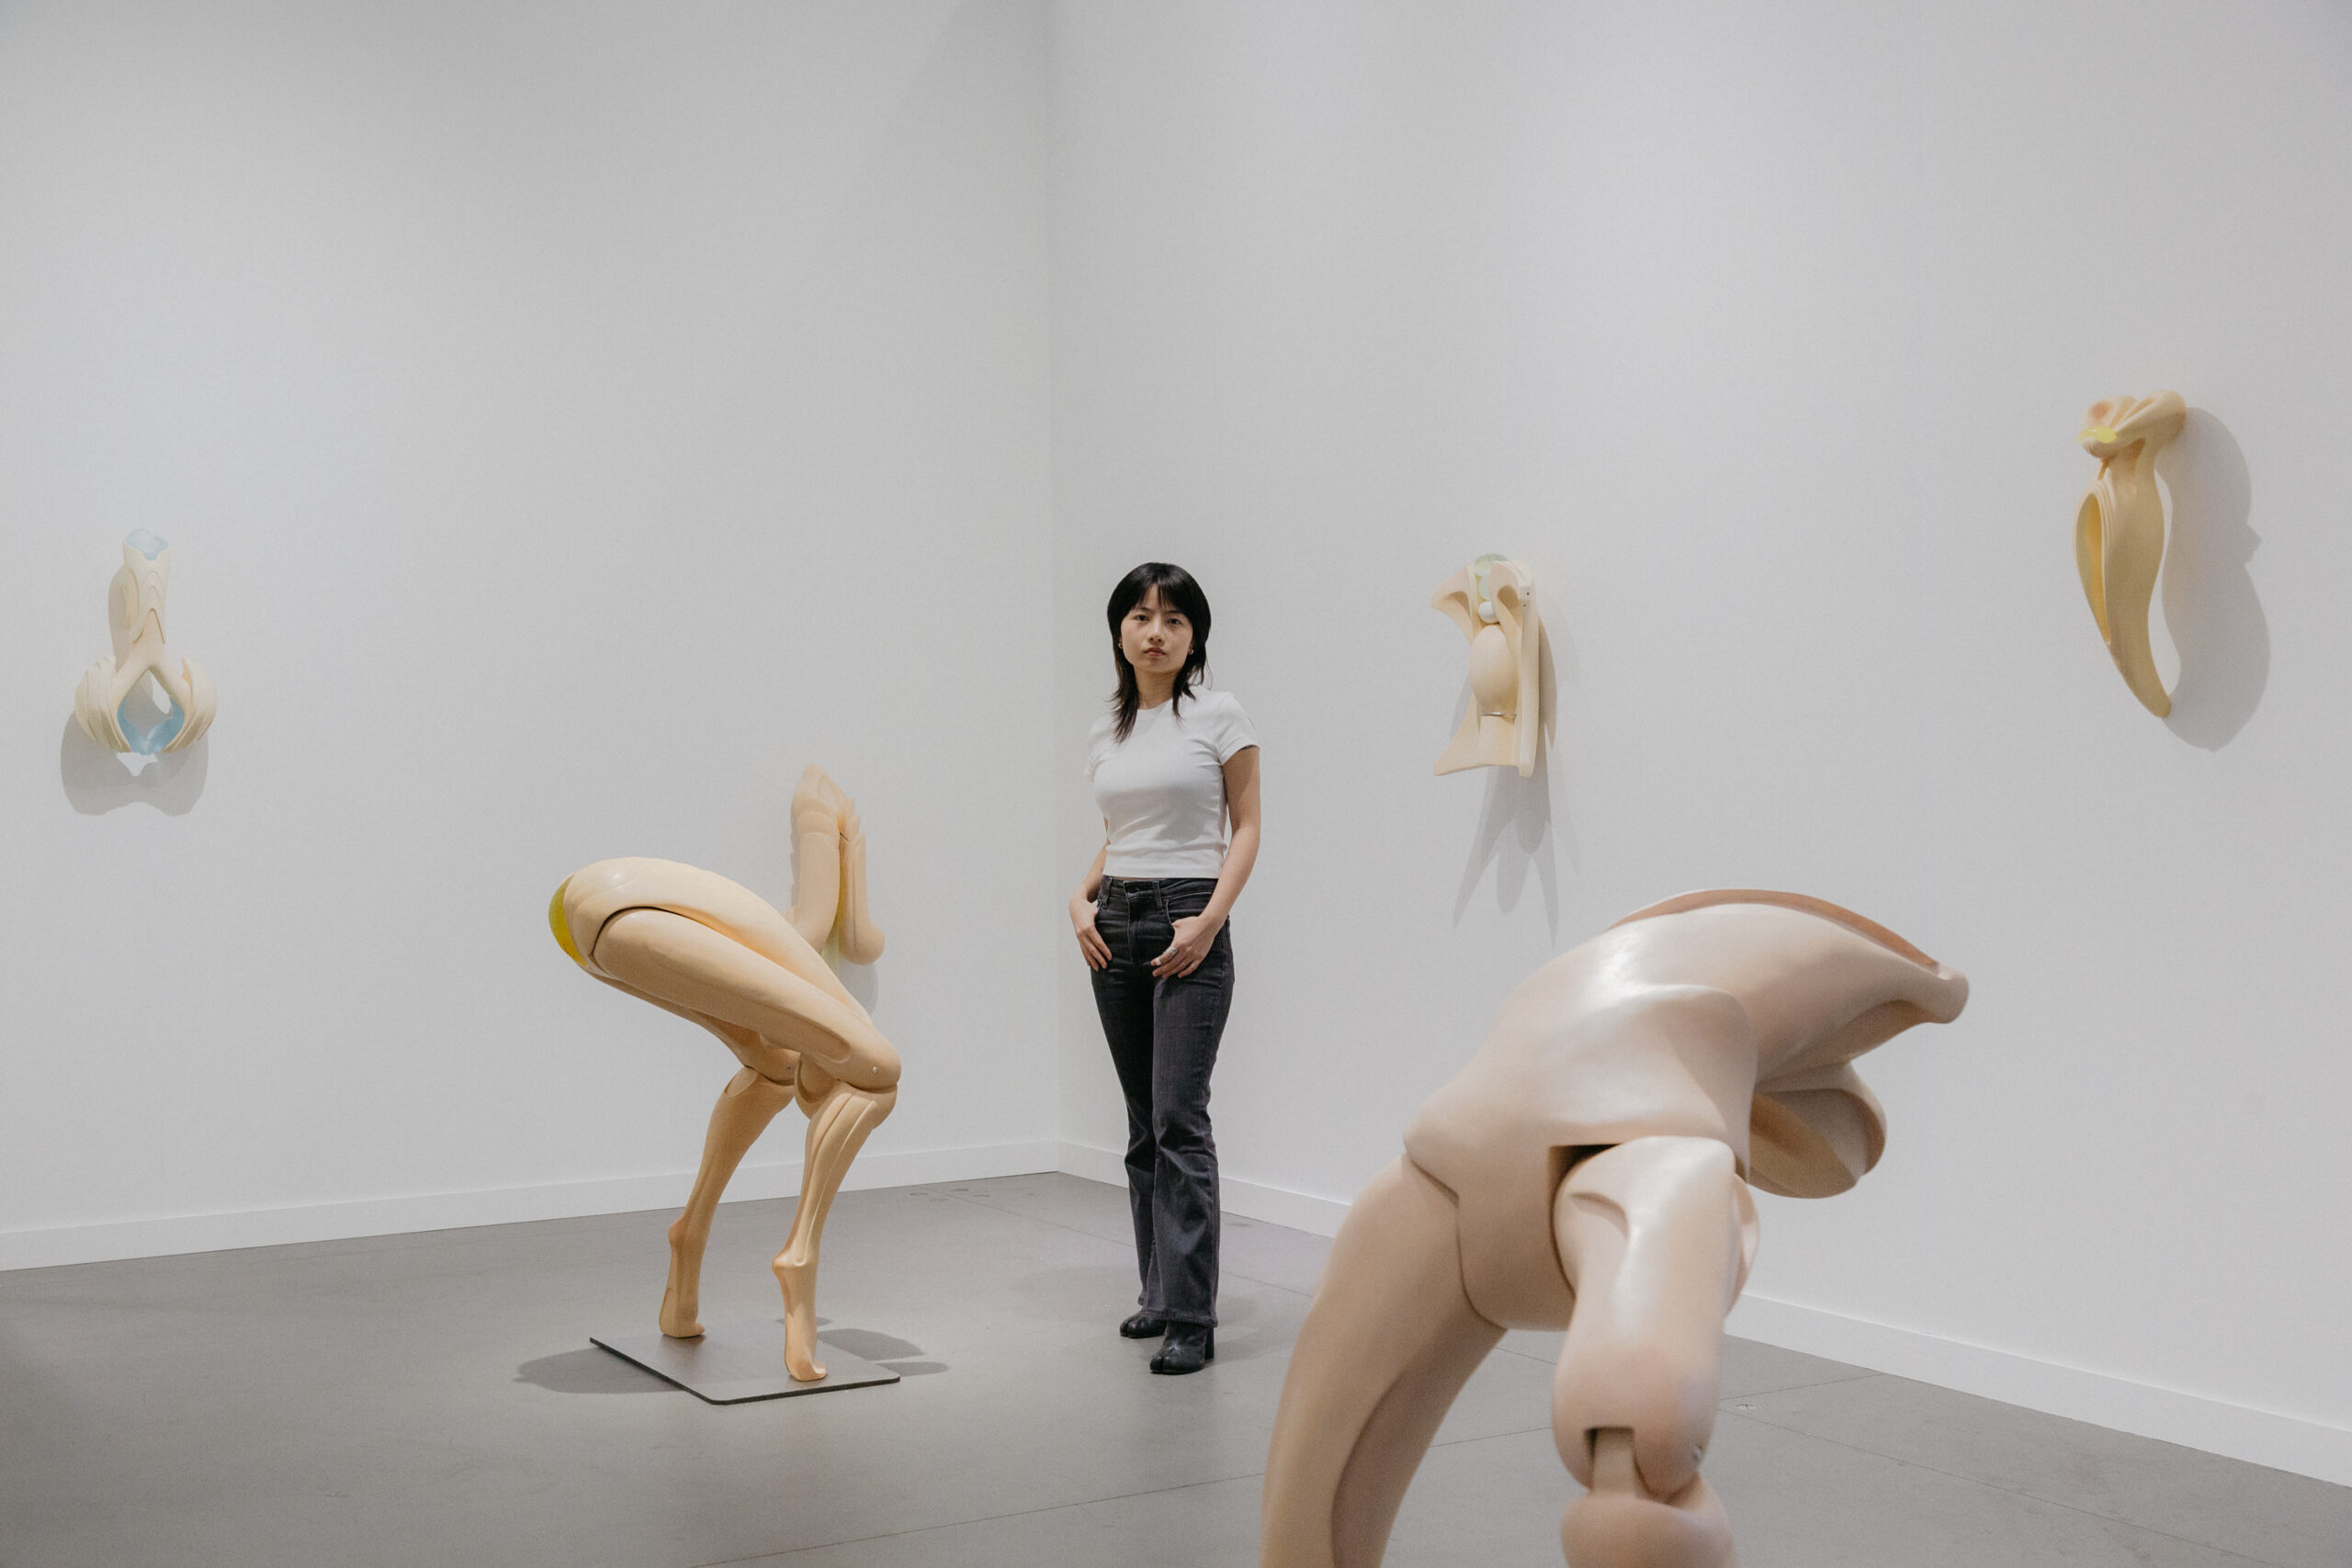 Before Robots, We Had Puppets Sculptor Liao Wen asks “Why Do We invent Human-Shaped Things?” image photo photo